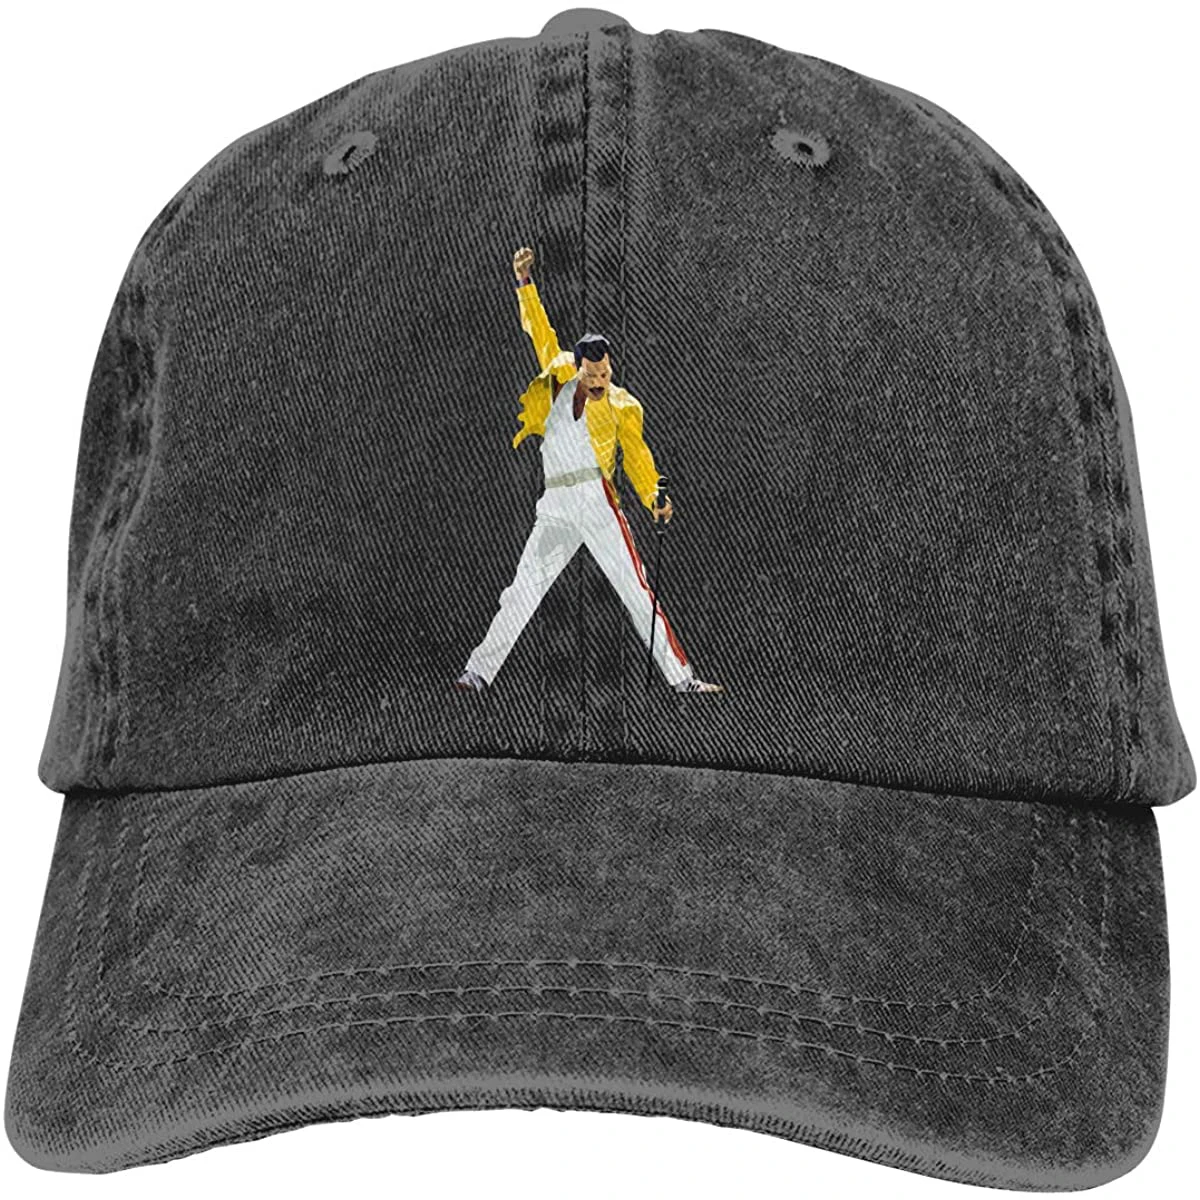 

Rock Band Queen Freddie Mercury Adult Cowboy Hat Baseball Cap Adjustable Athletic Customized Awesome Hat Gorras Hombre